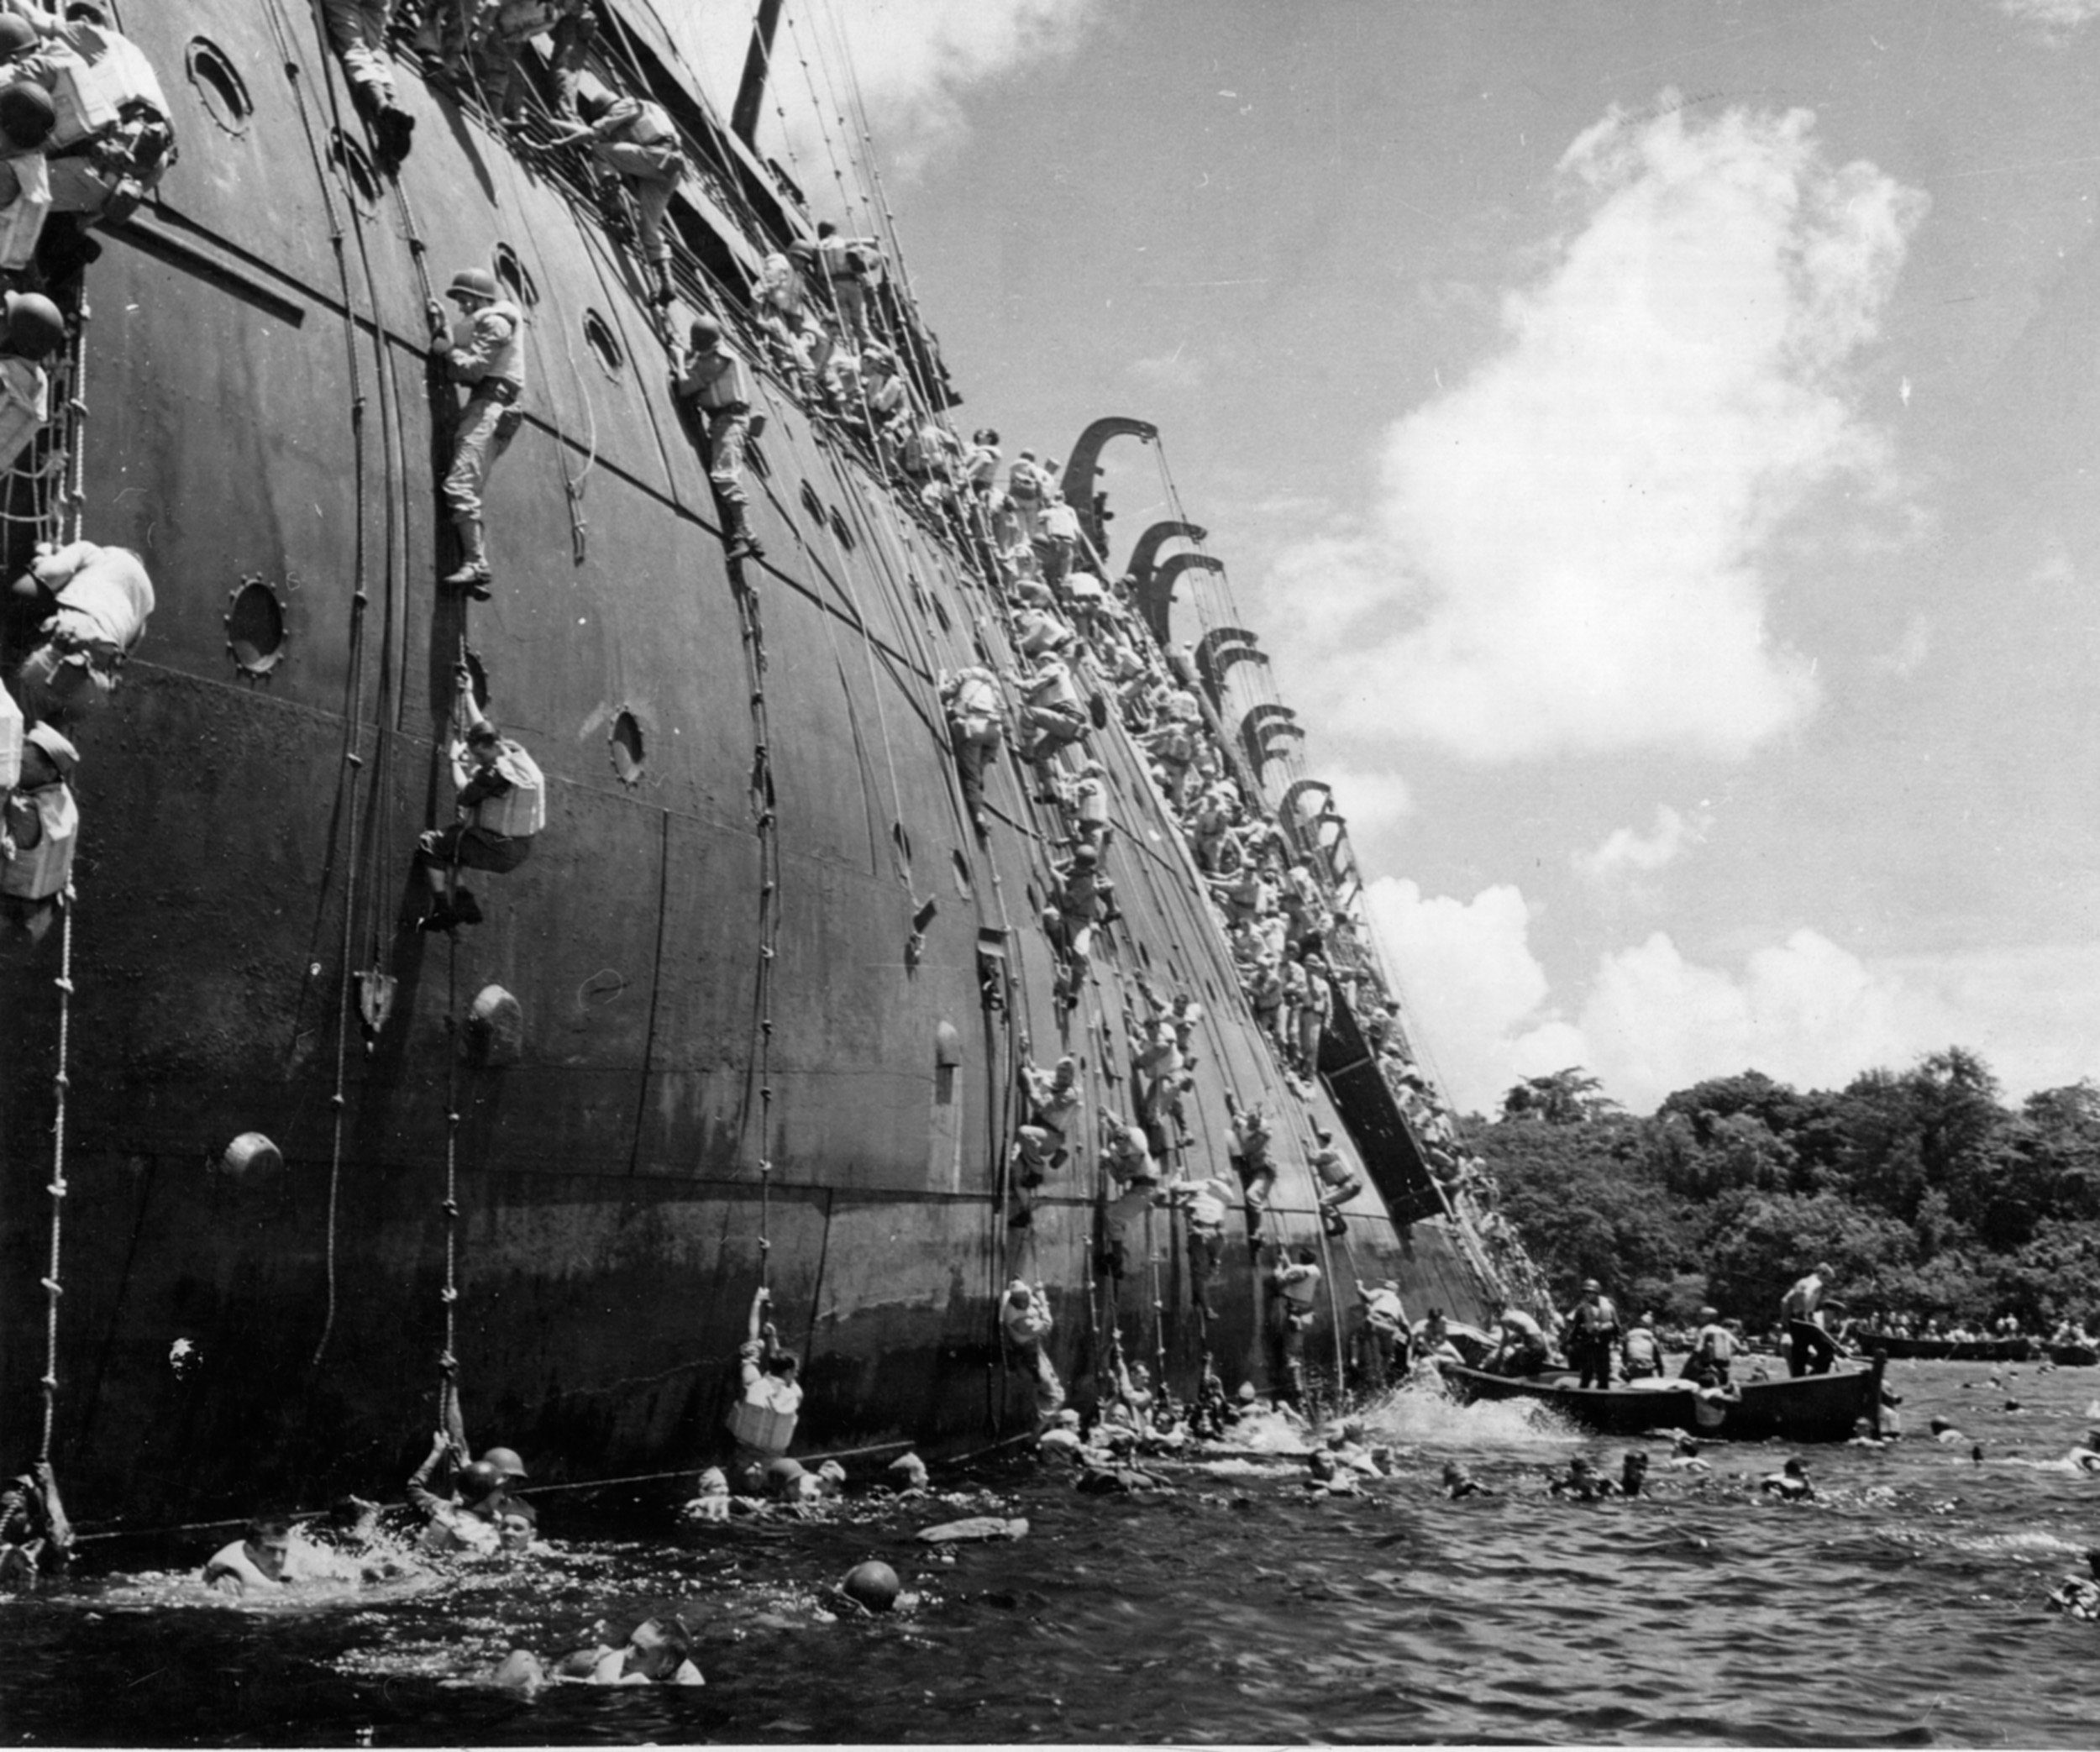 Soldiers scramble down the side of the SS President Coolidge as the ship lists heavily. Life boats await those who cannot swim.